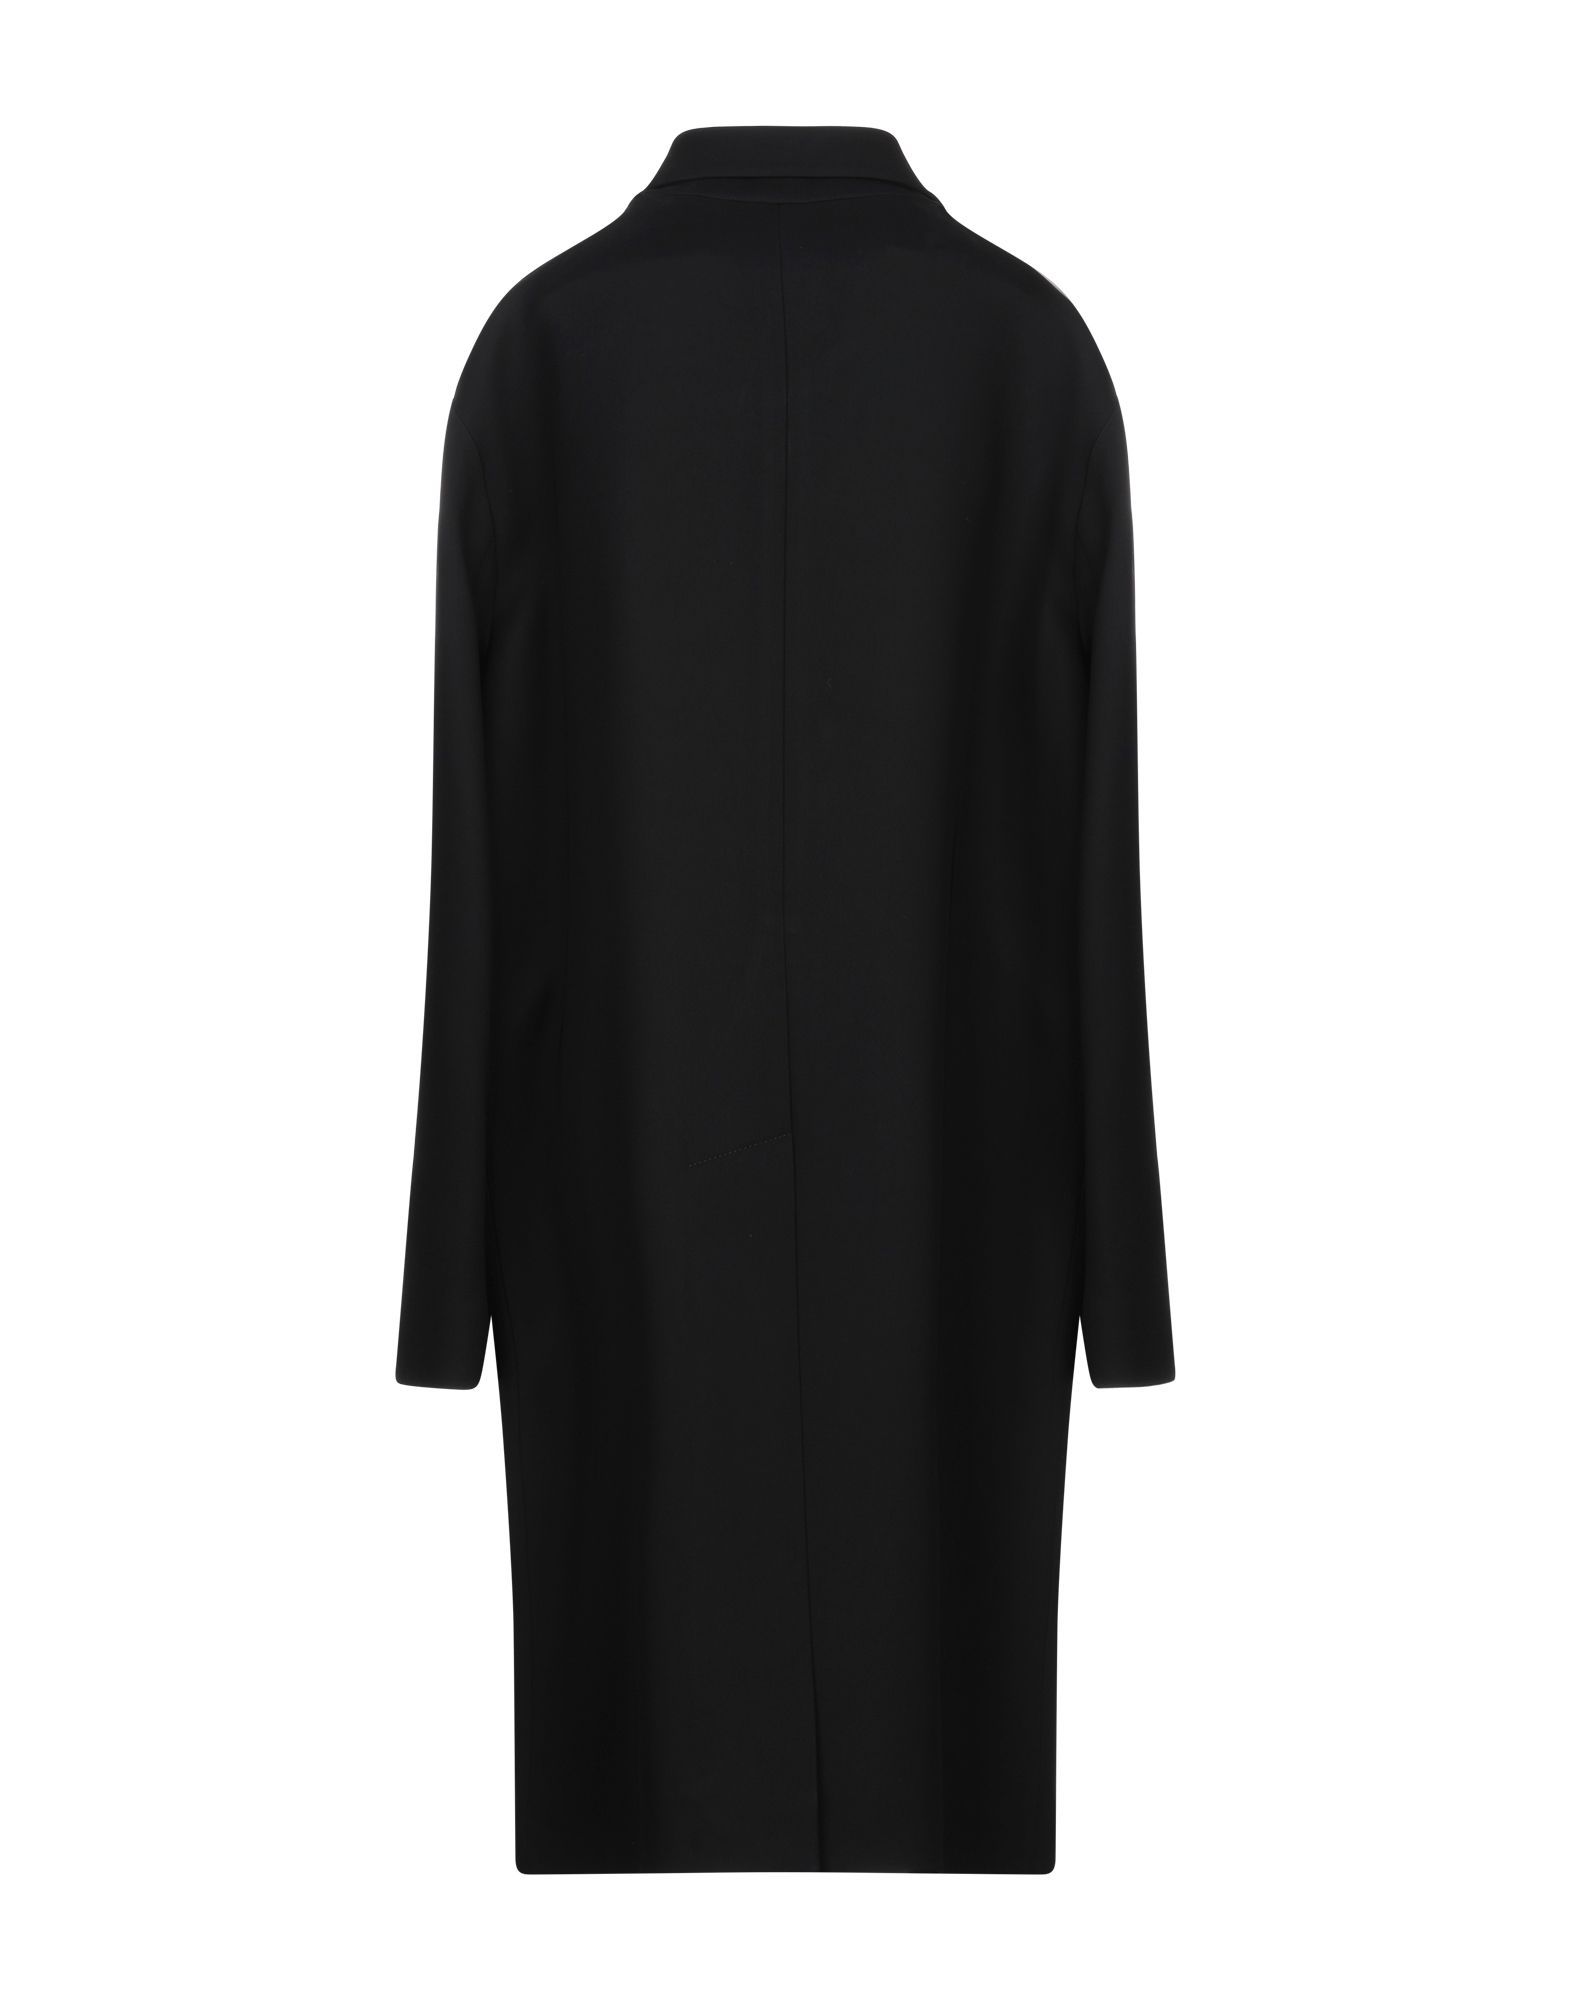 crepe, no appliqués, basic solid colour, single-breasted , button closing, classic neckline, multipockets, long sleeves, unlined, single-breasted jacket